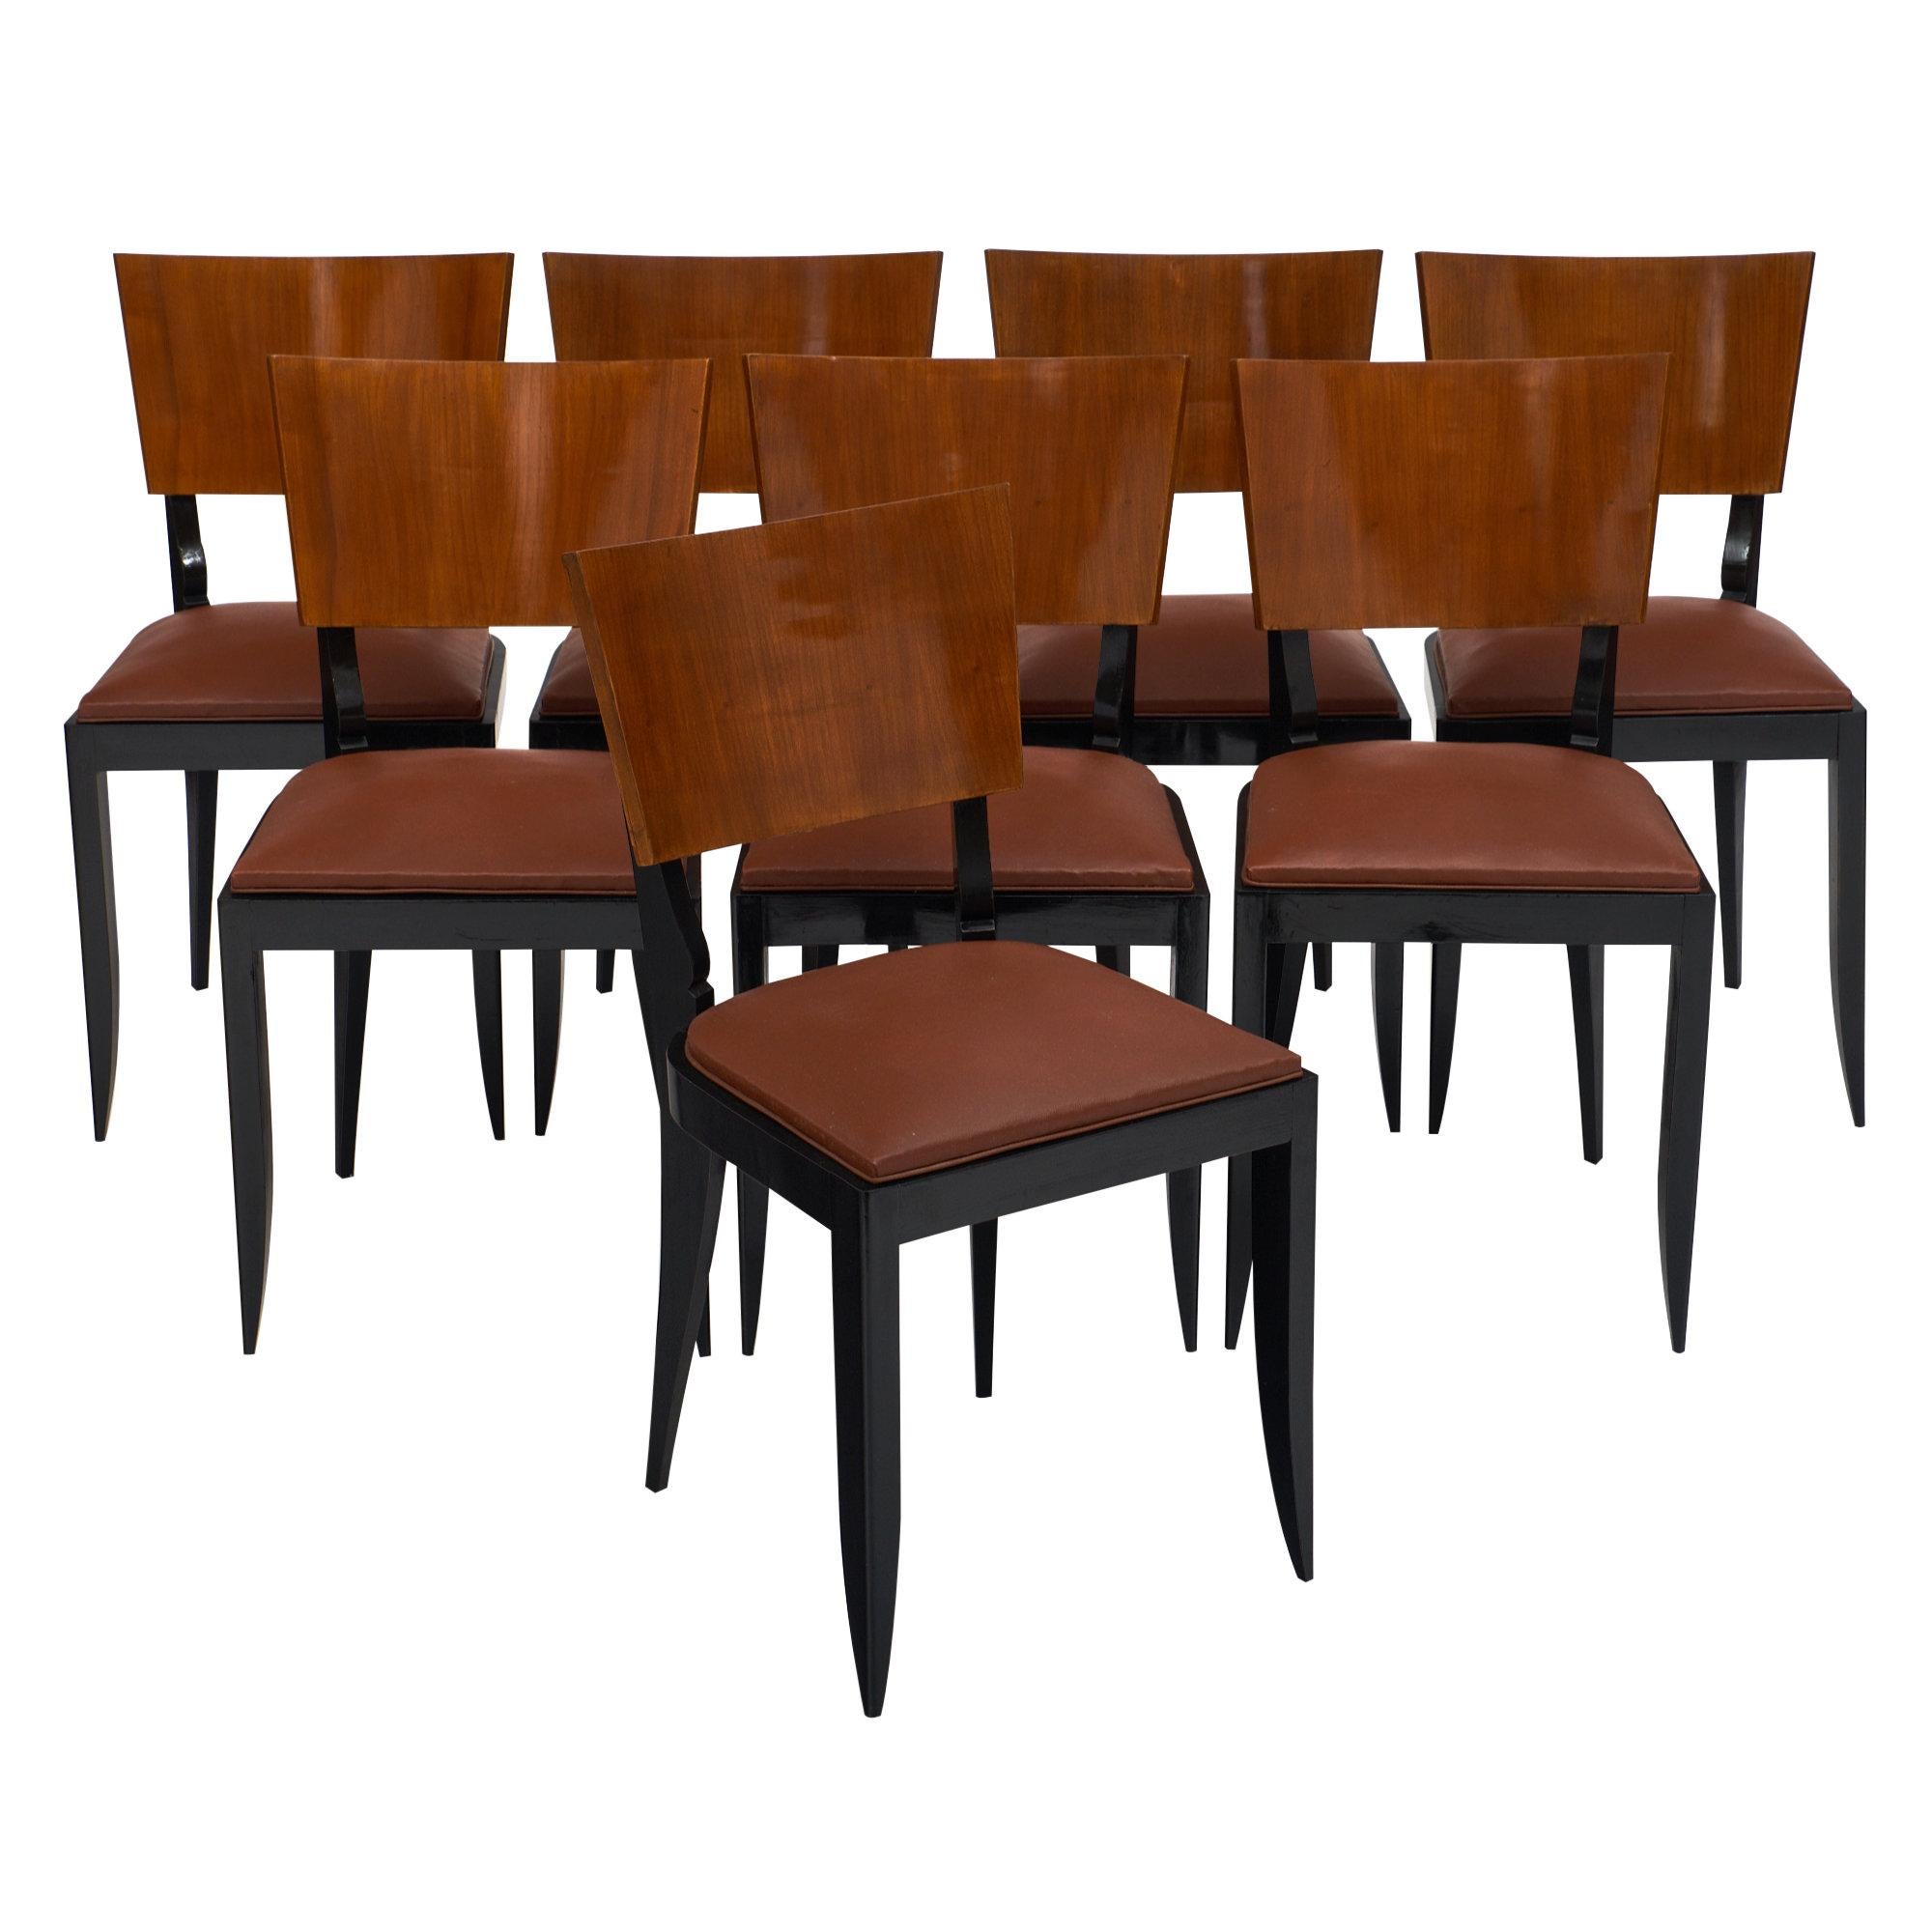 Eight Art Deco Period Dining Chairs